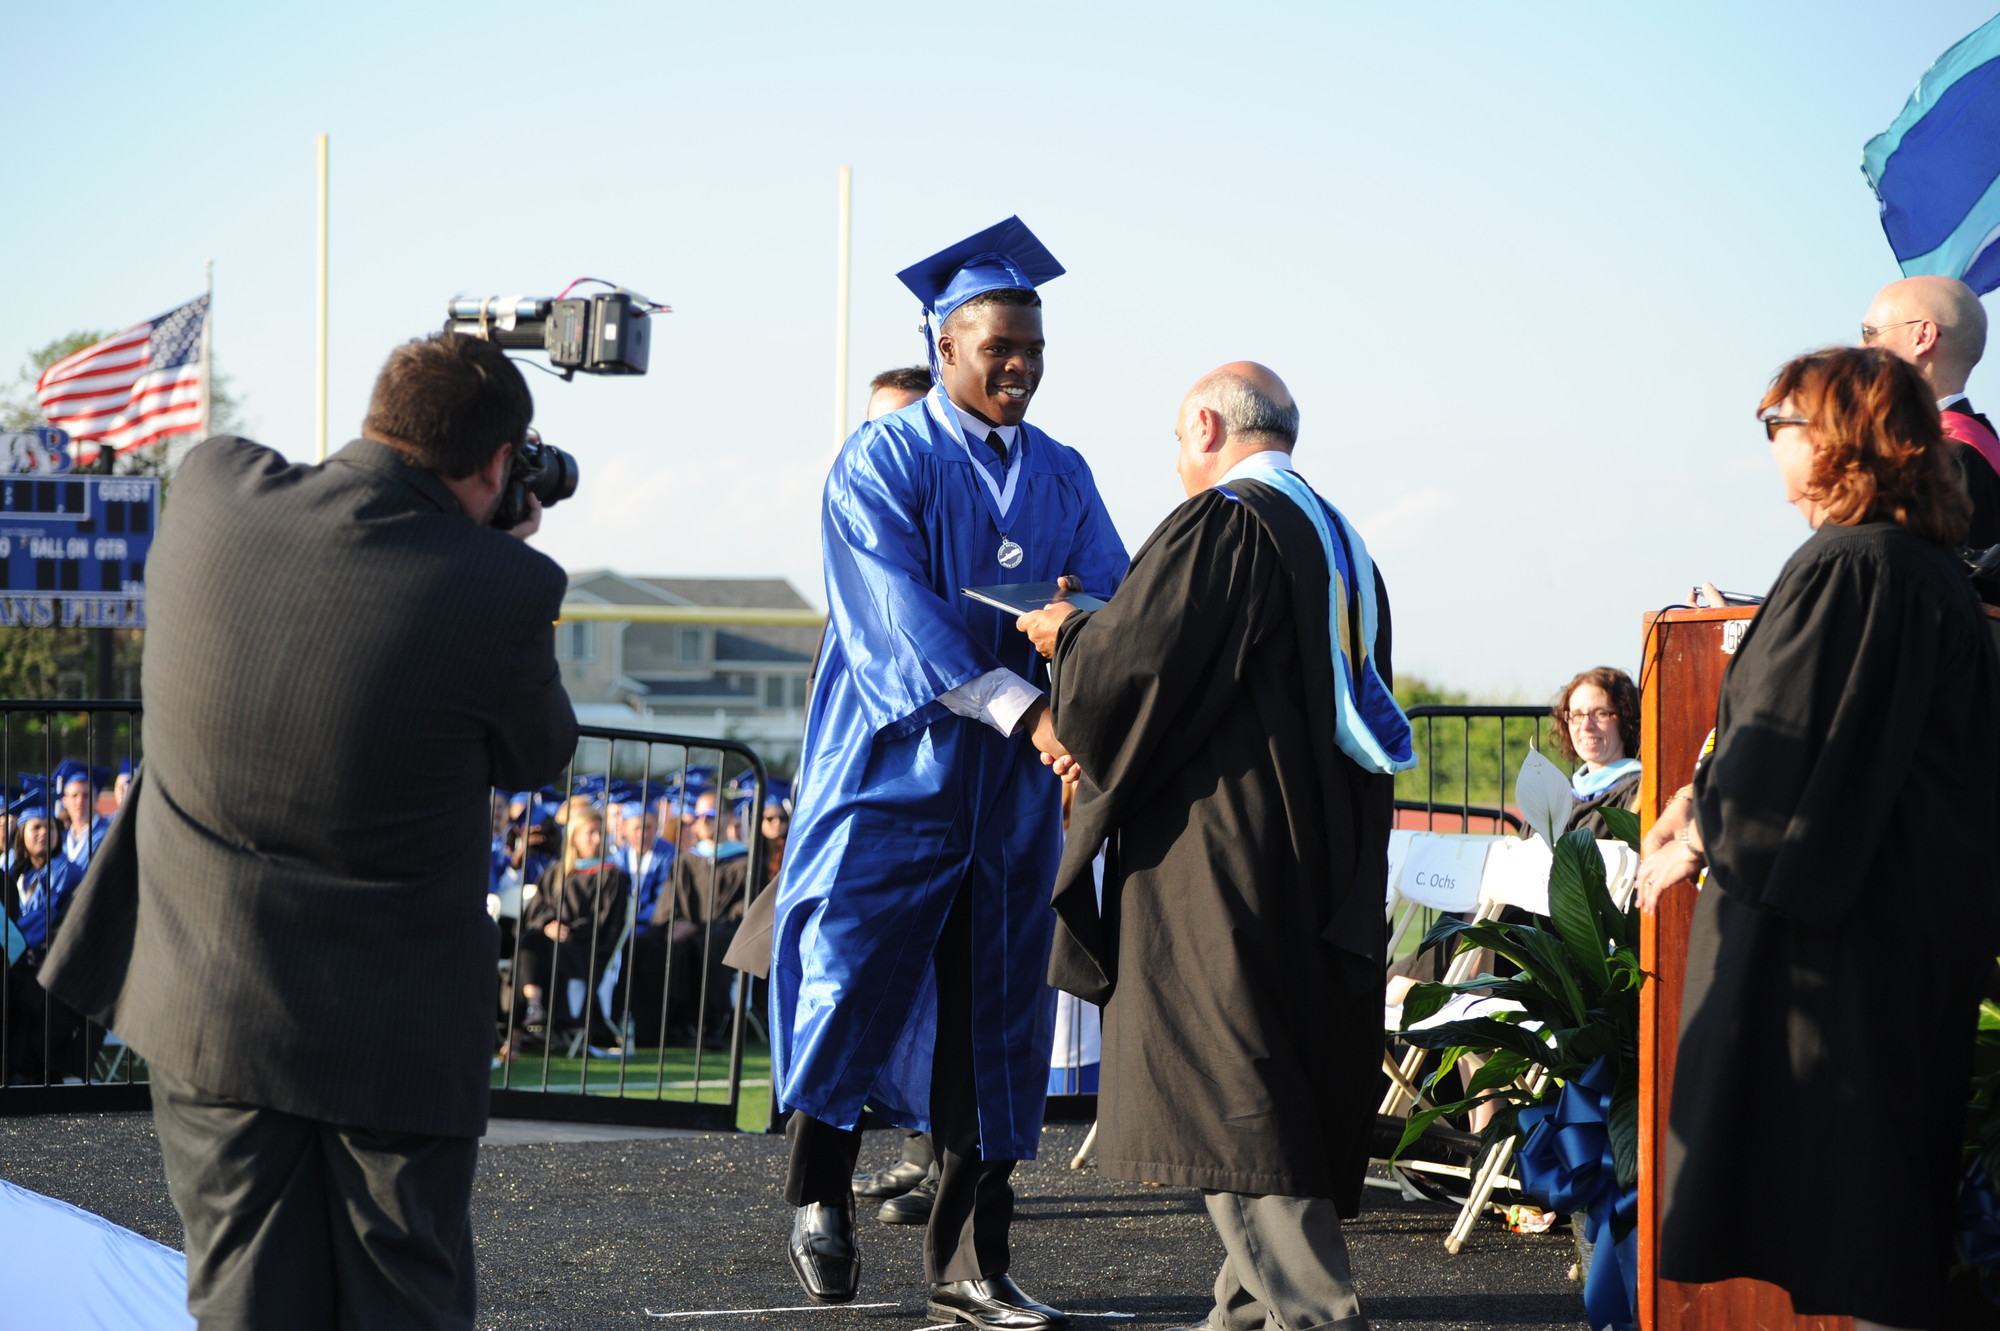 Donovan Campbell accepted his diploma from Superintendent David Weiss.